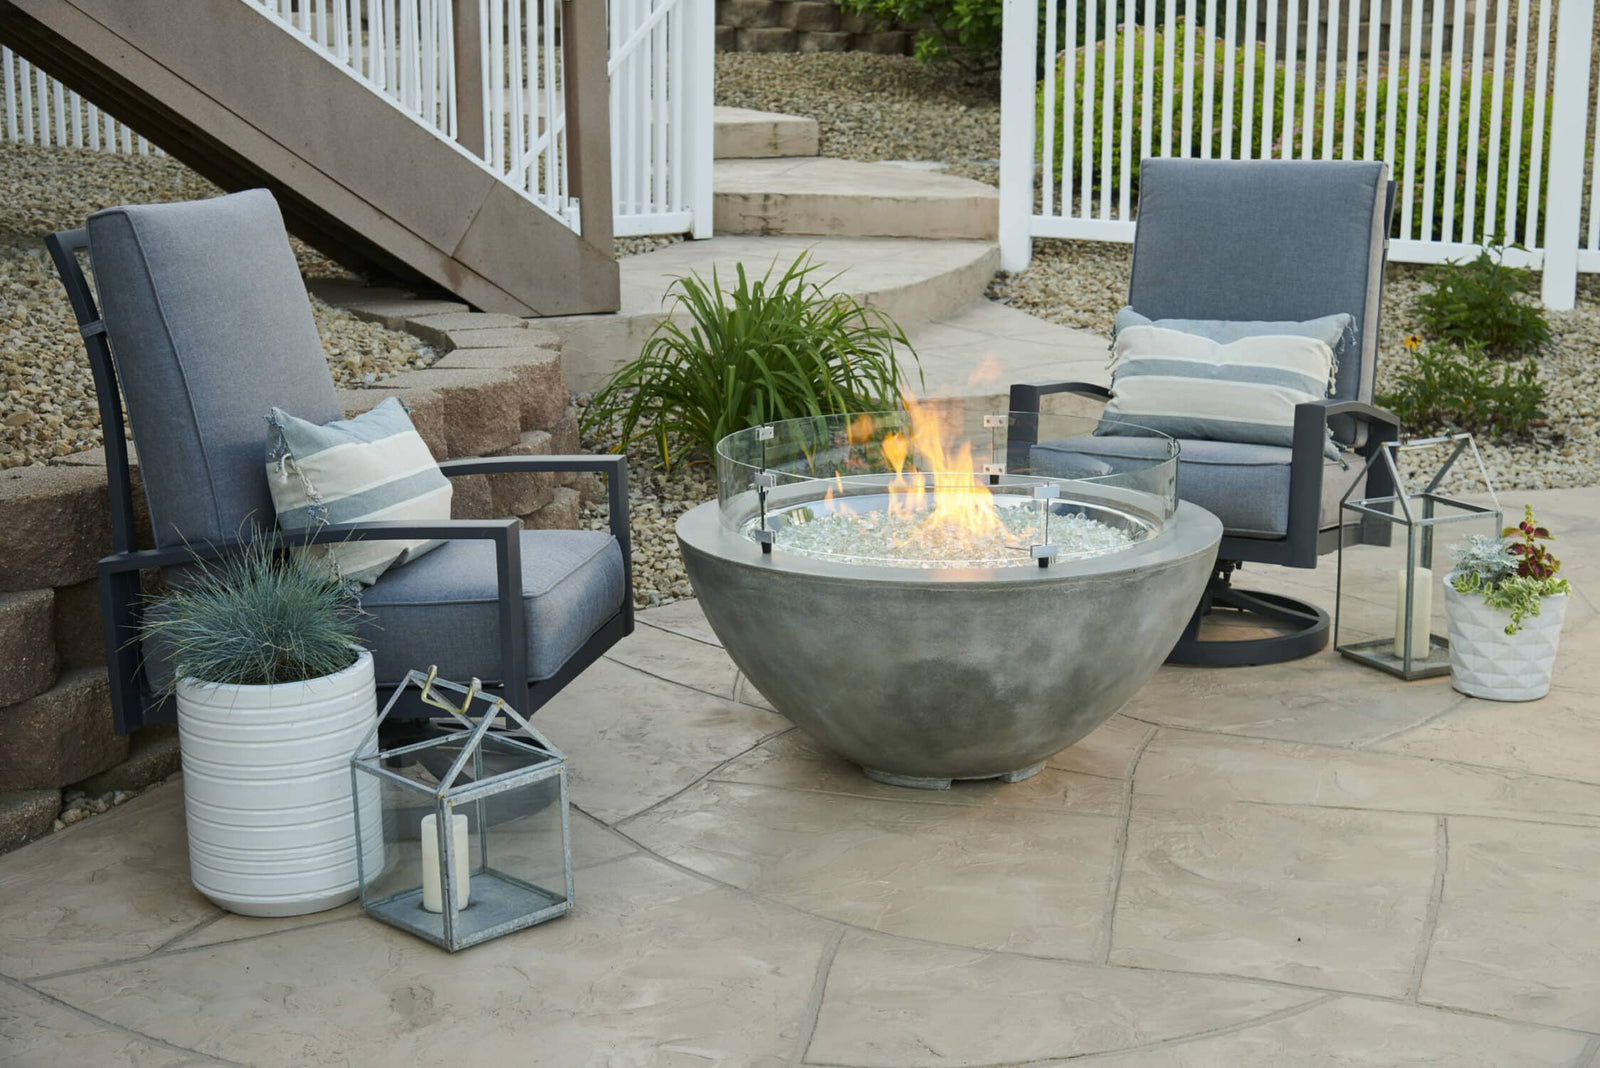 The Outdoor GreatRoom Announces Updates to Popular Cove Collection